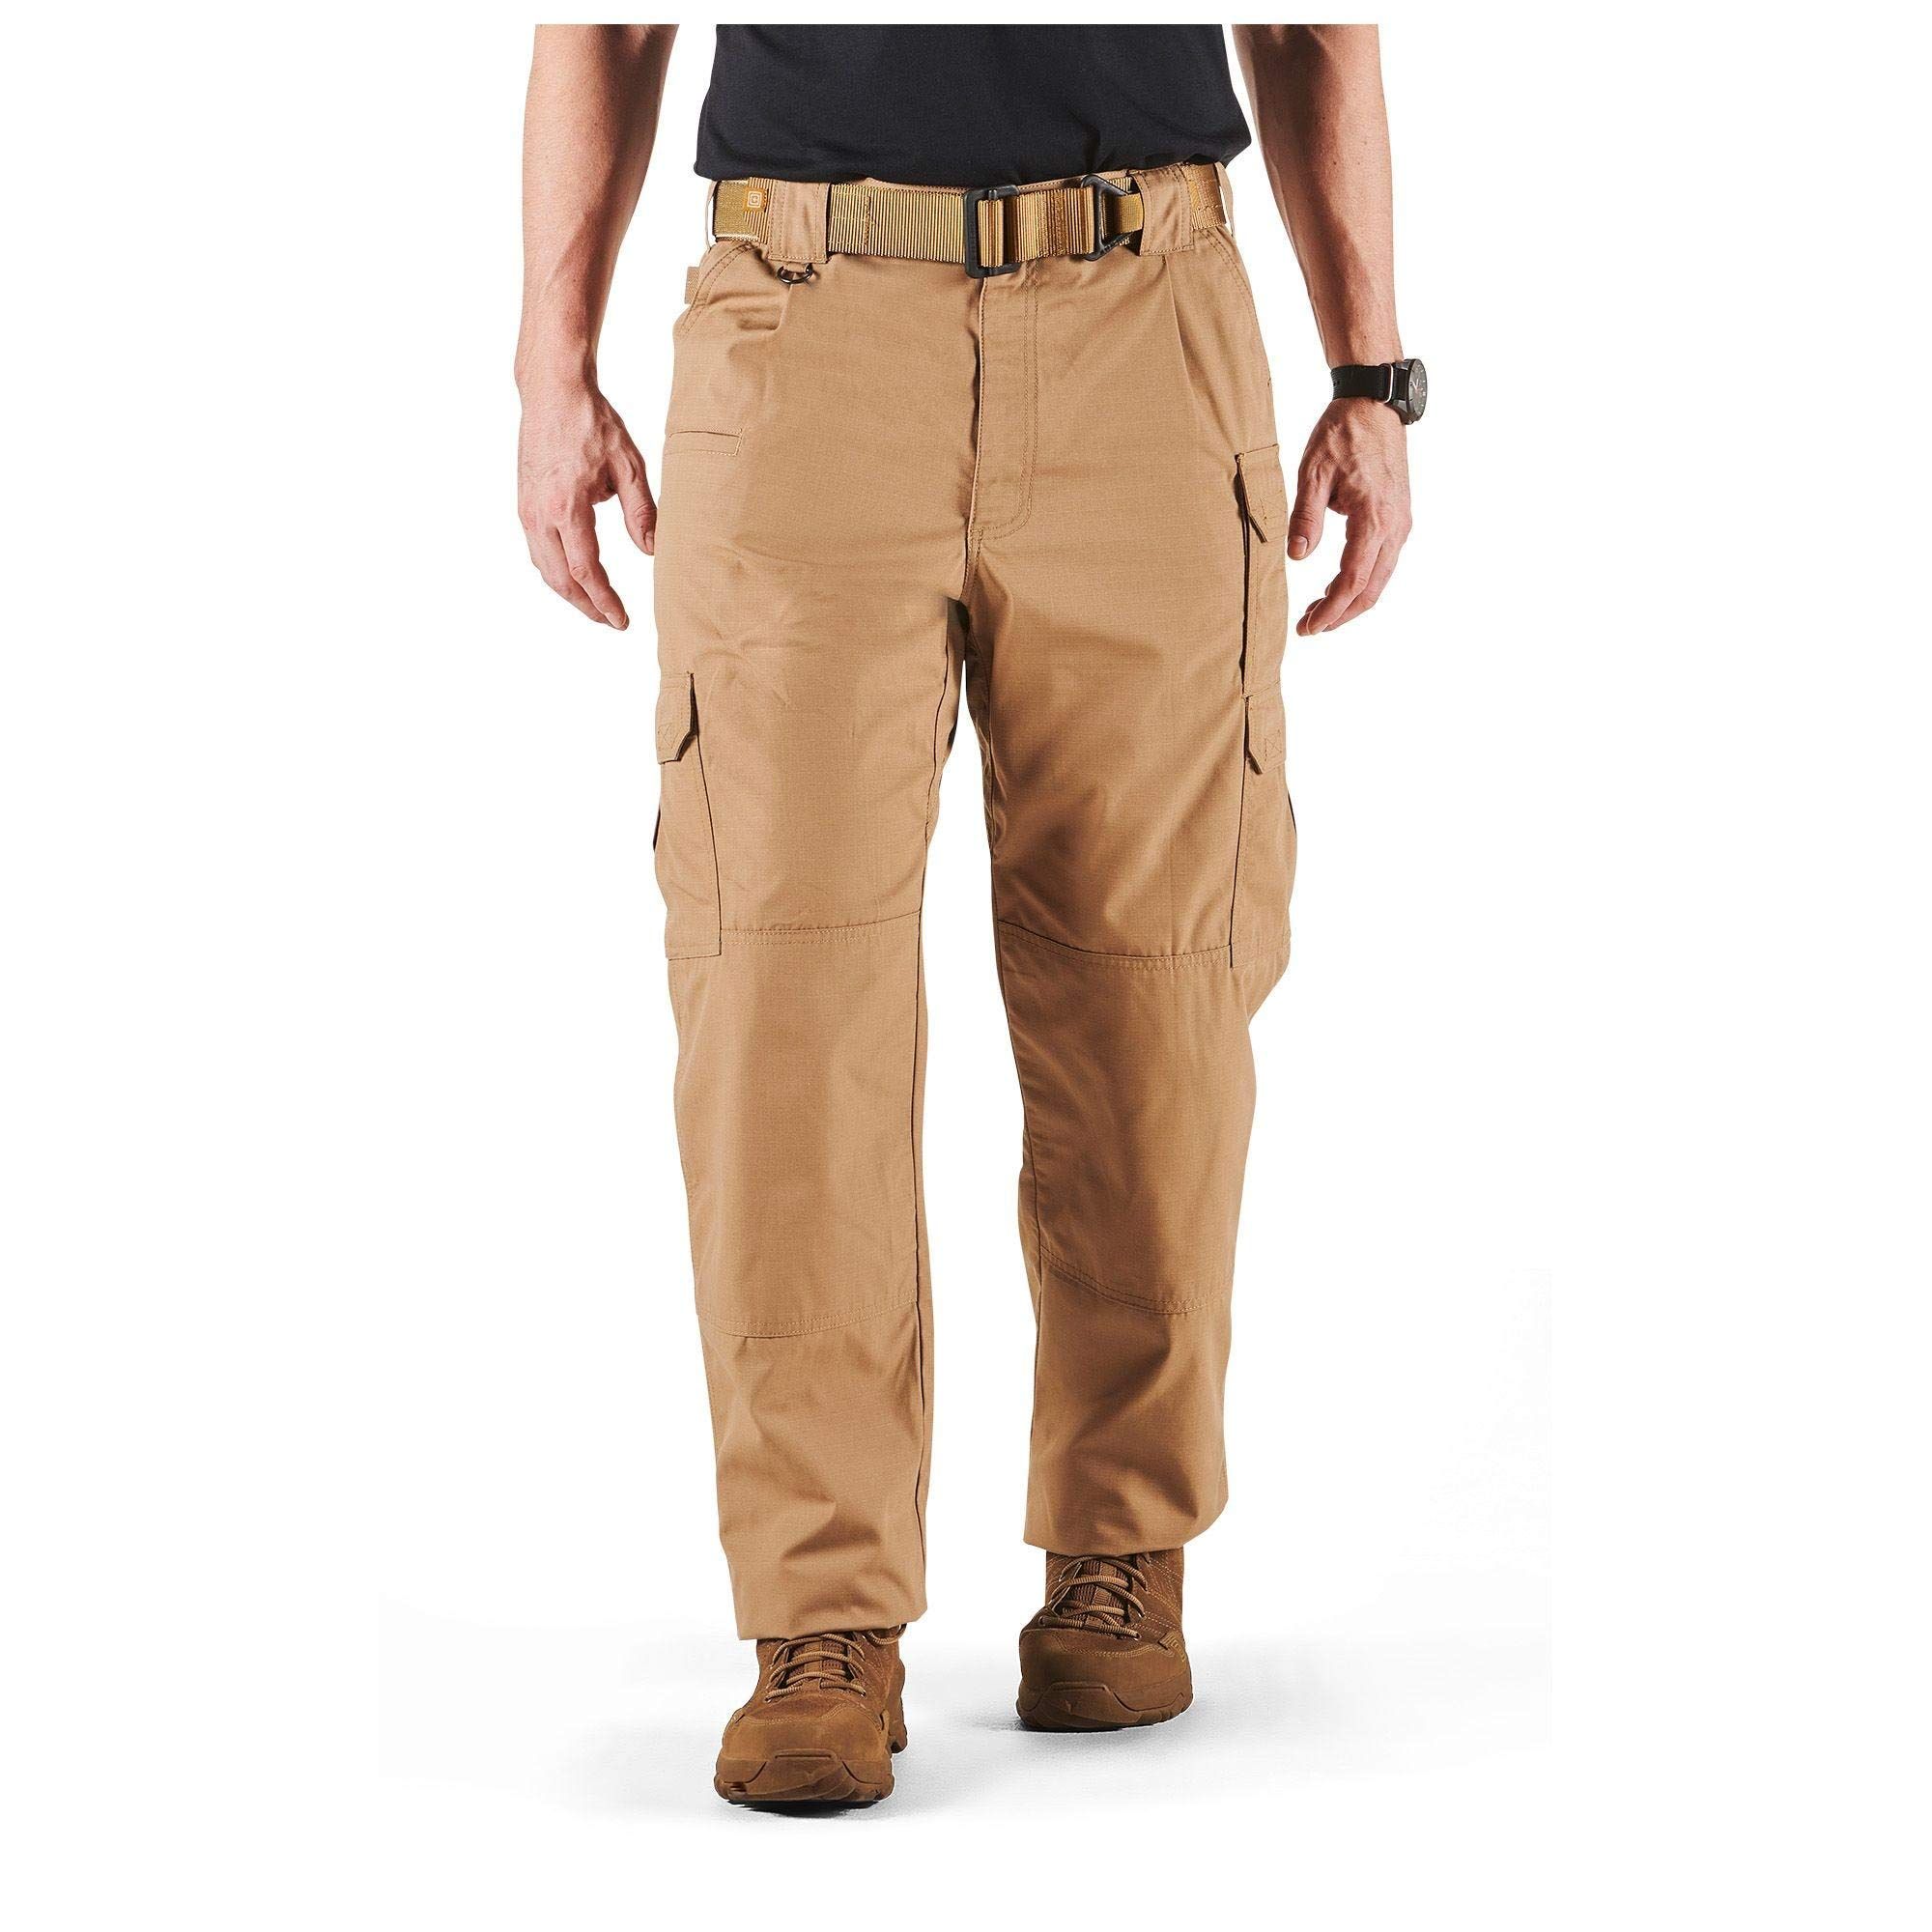 The 10 Best Work Pants for Construction in 2023  Anbu Safety